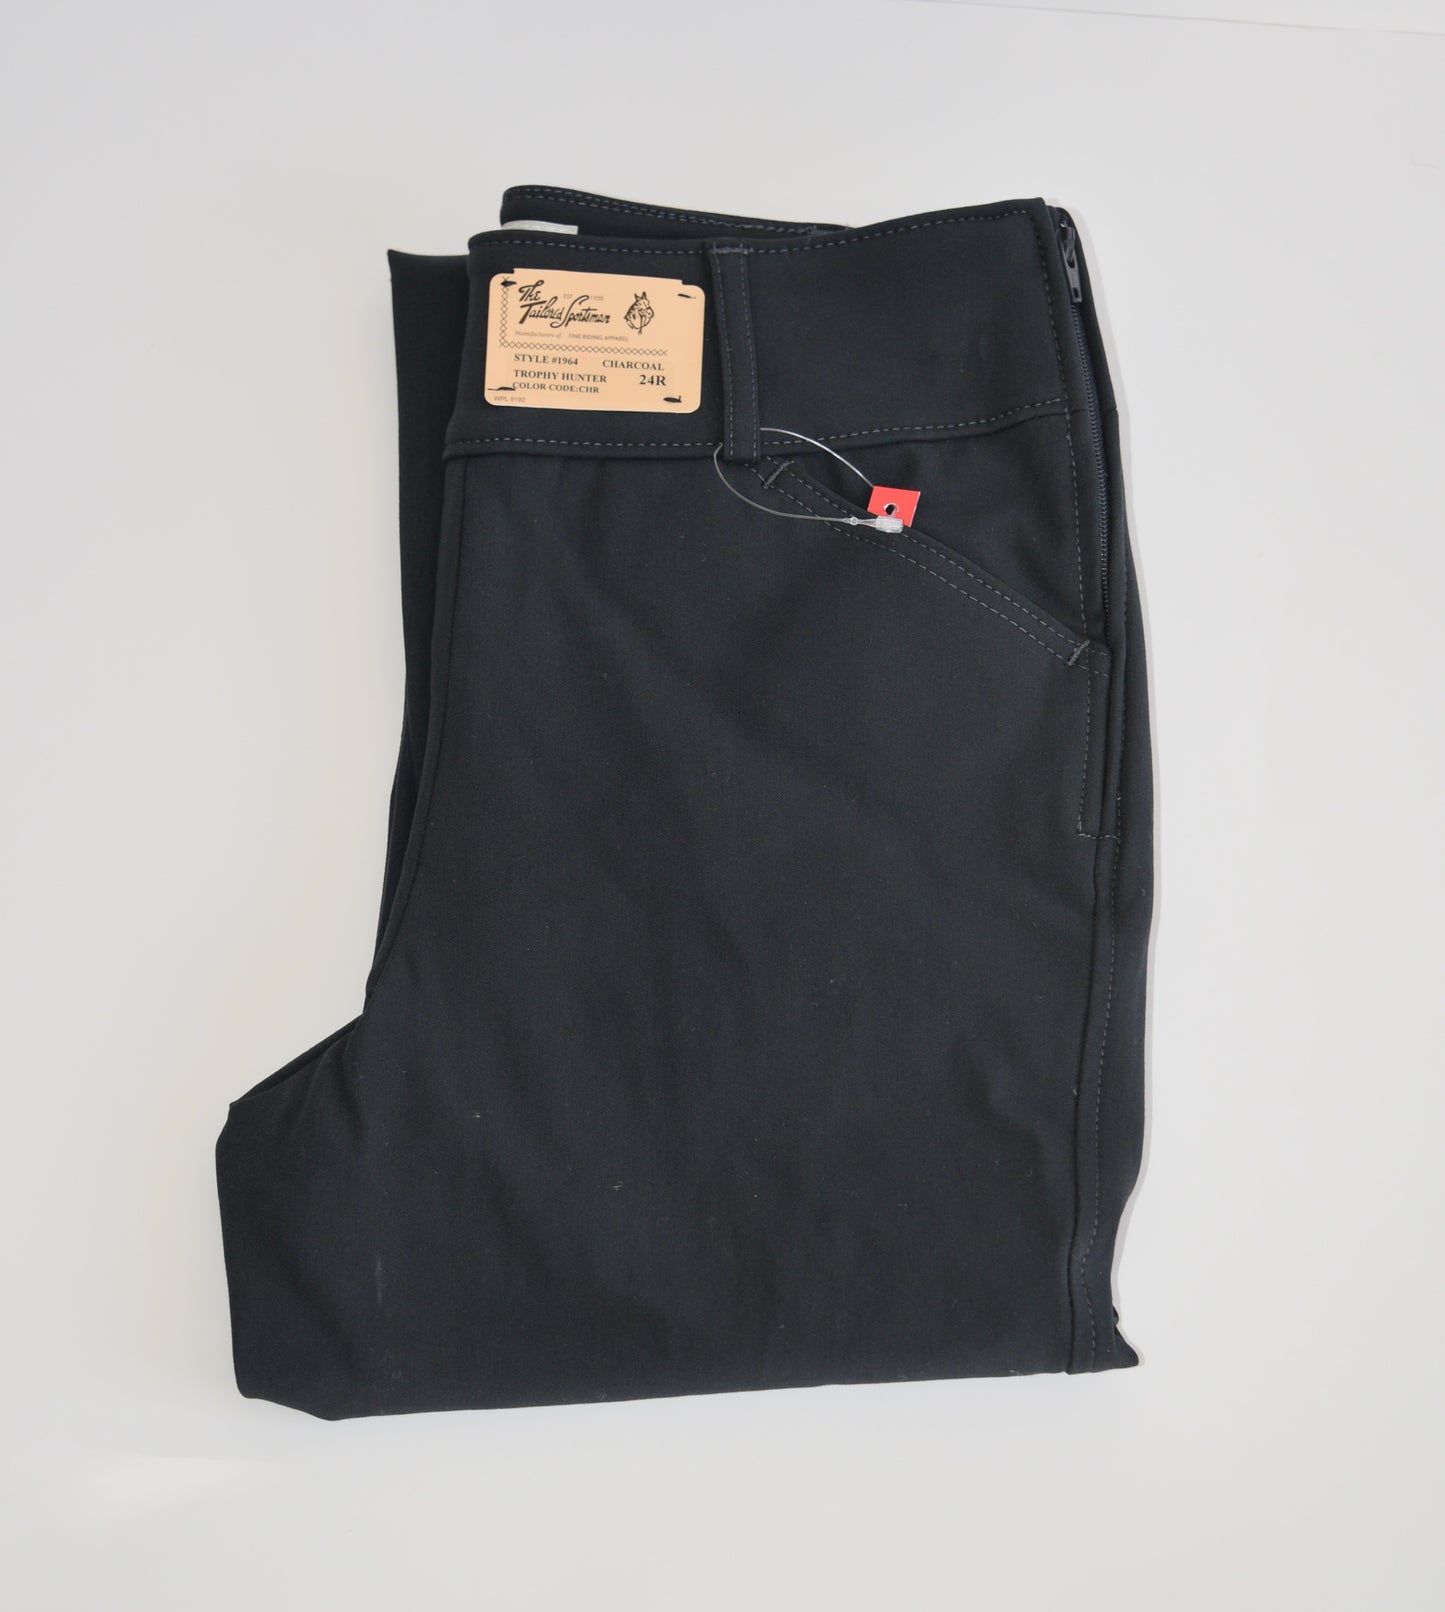 Show breeches tailored sportsman